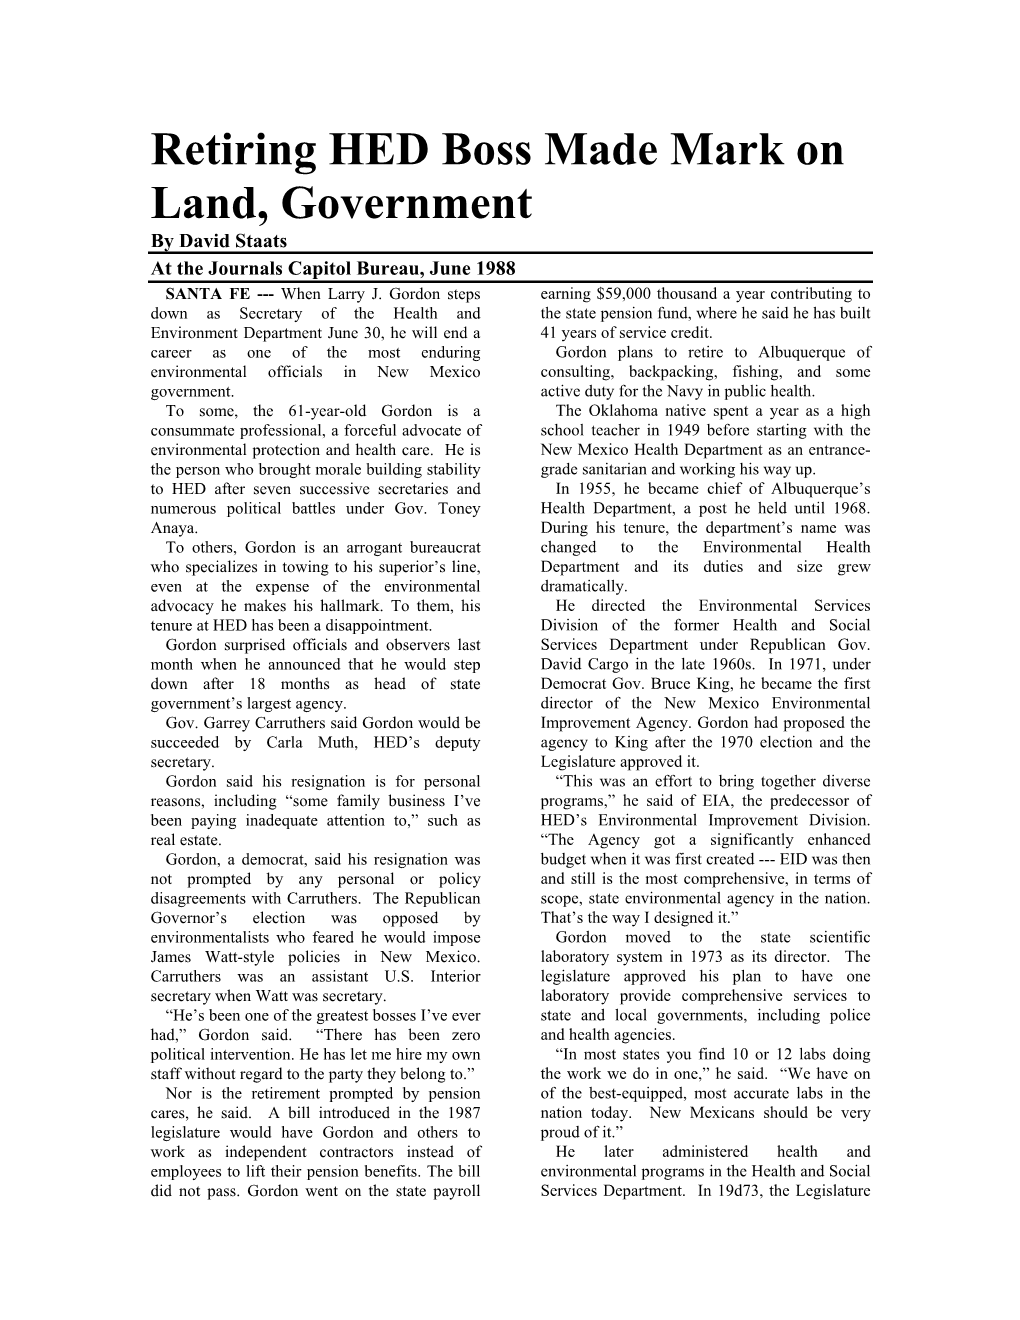 Retiring HED Boss Made Mark on Land, Government by David Staats at the Journals Capitol Bureau, June 1988 SANTA FE --- When Larry J